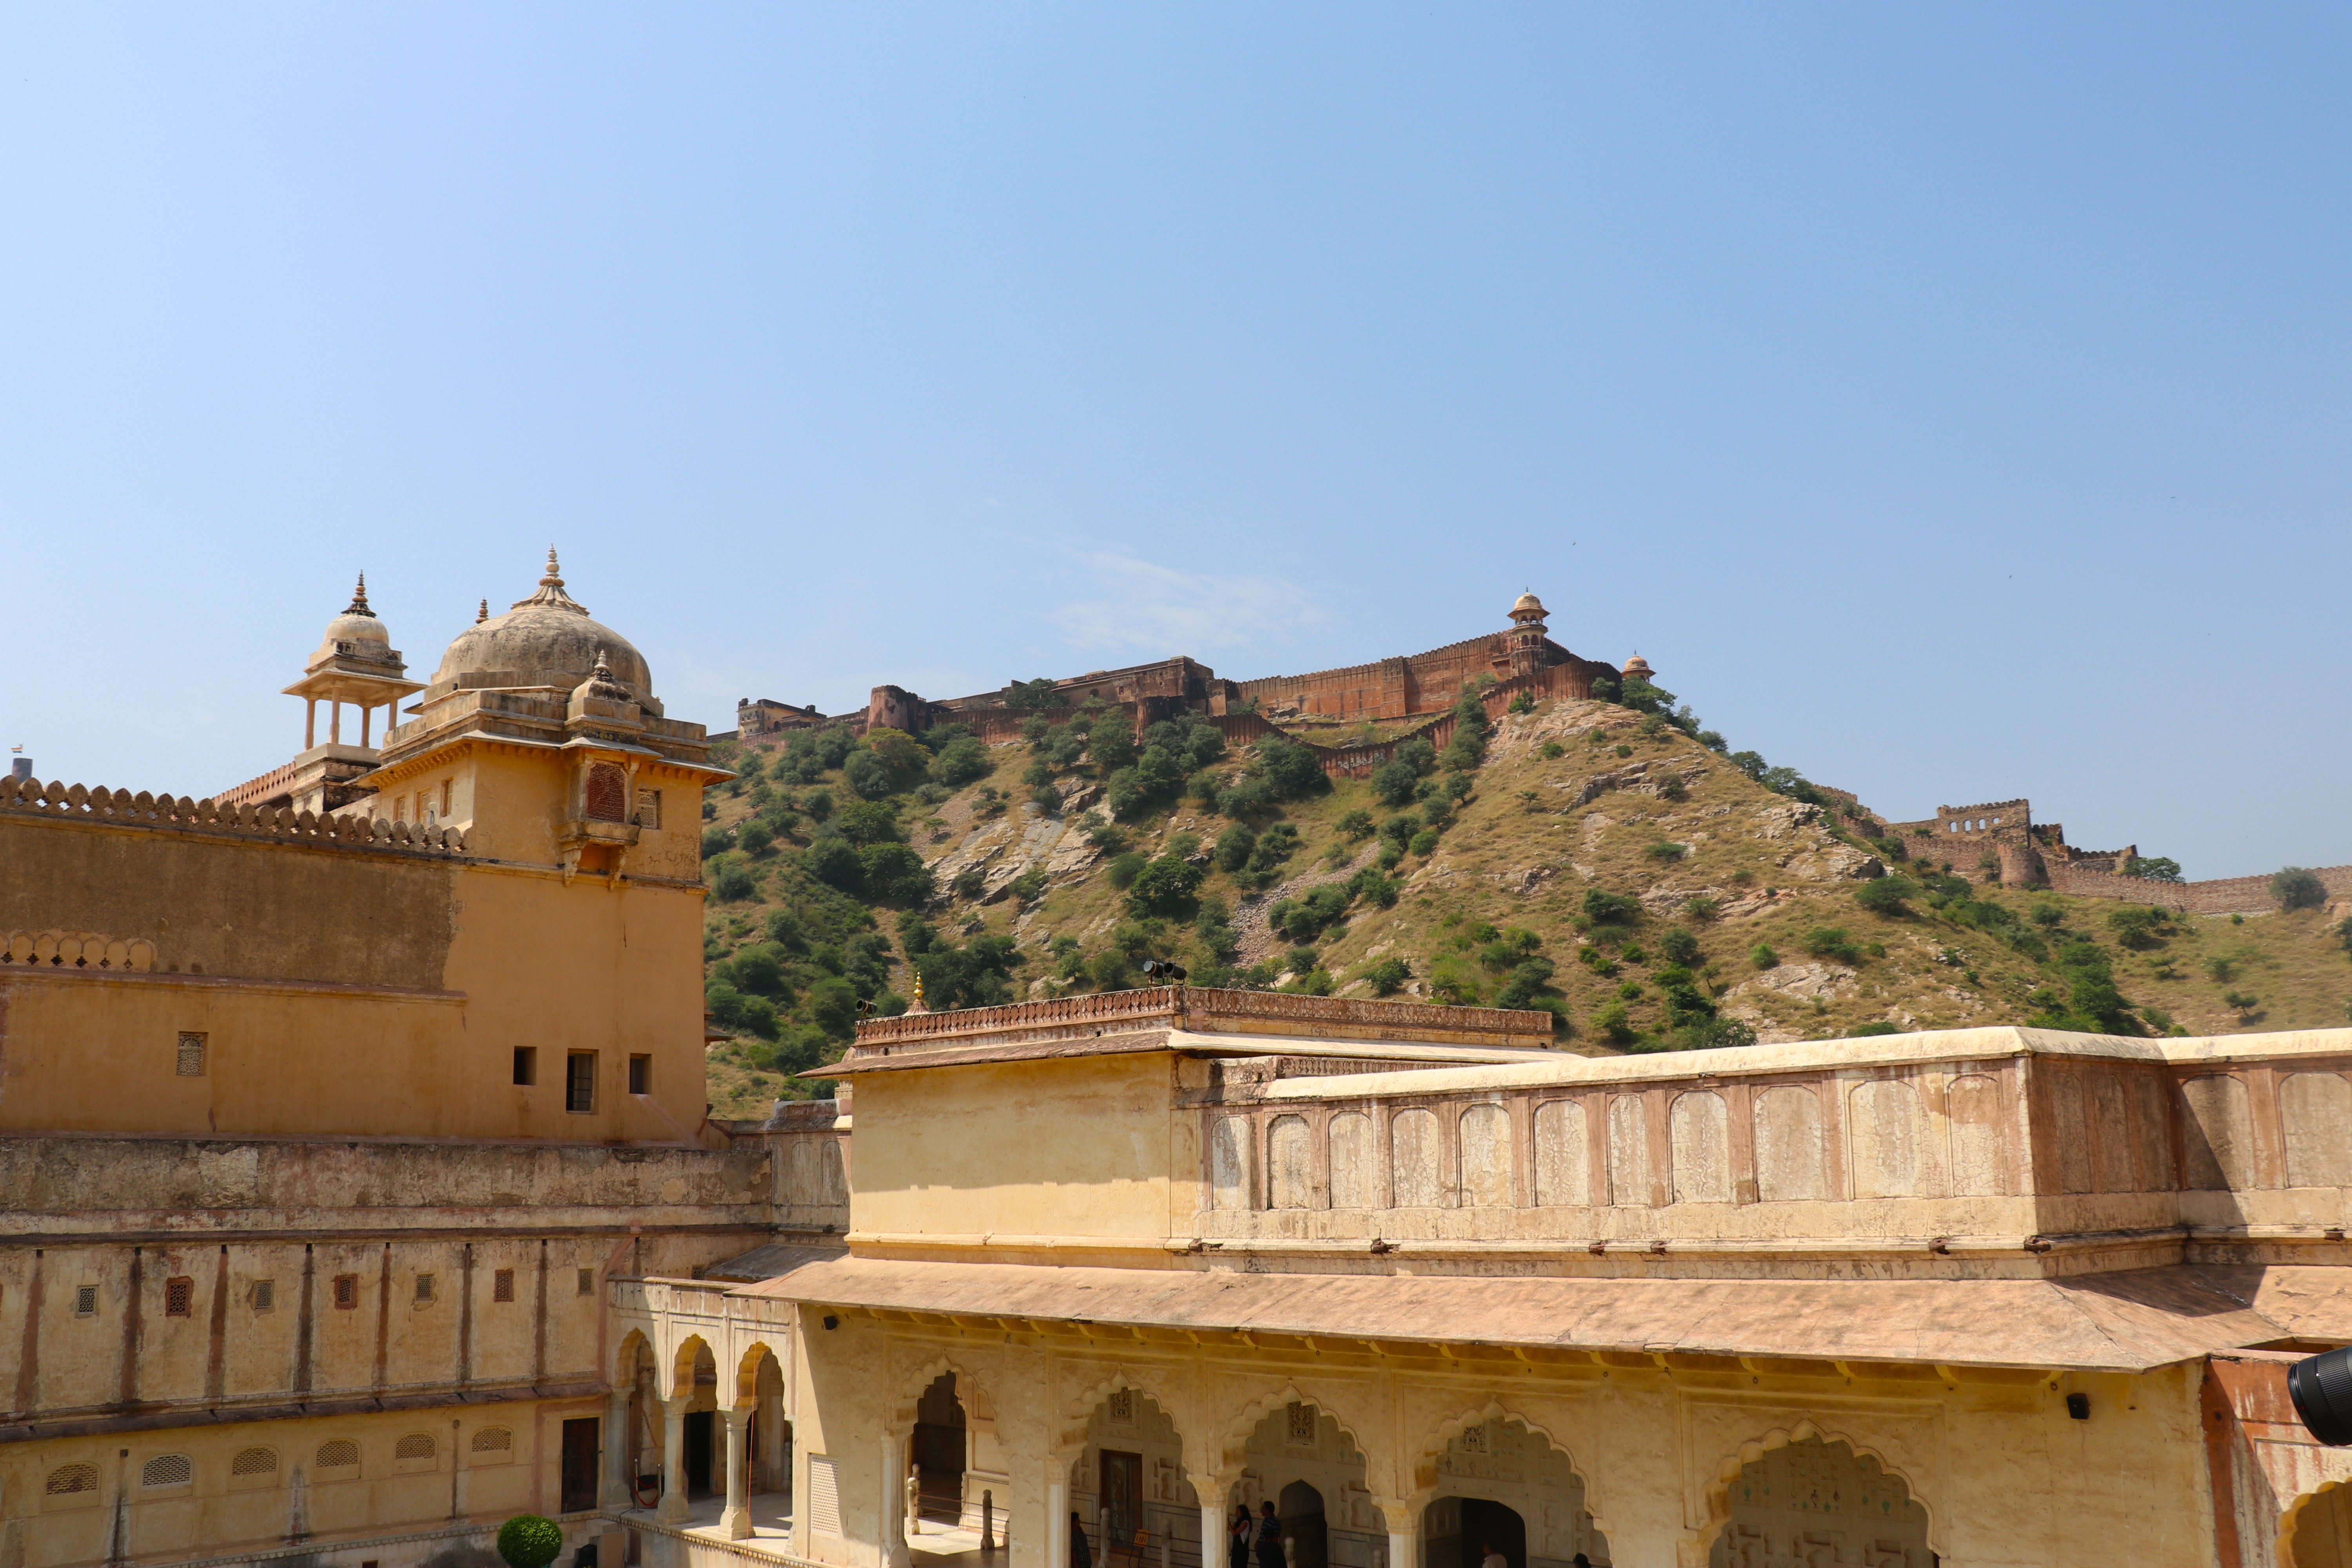 The Amber Fort of Marble